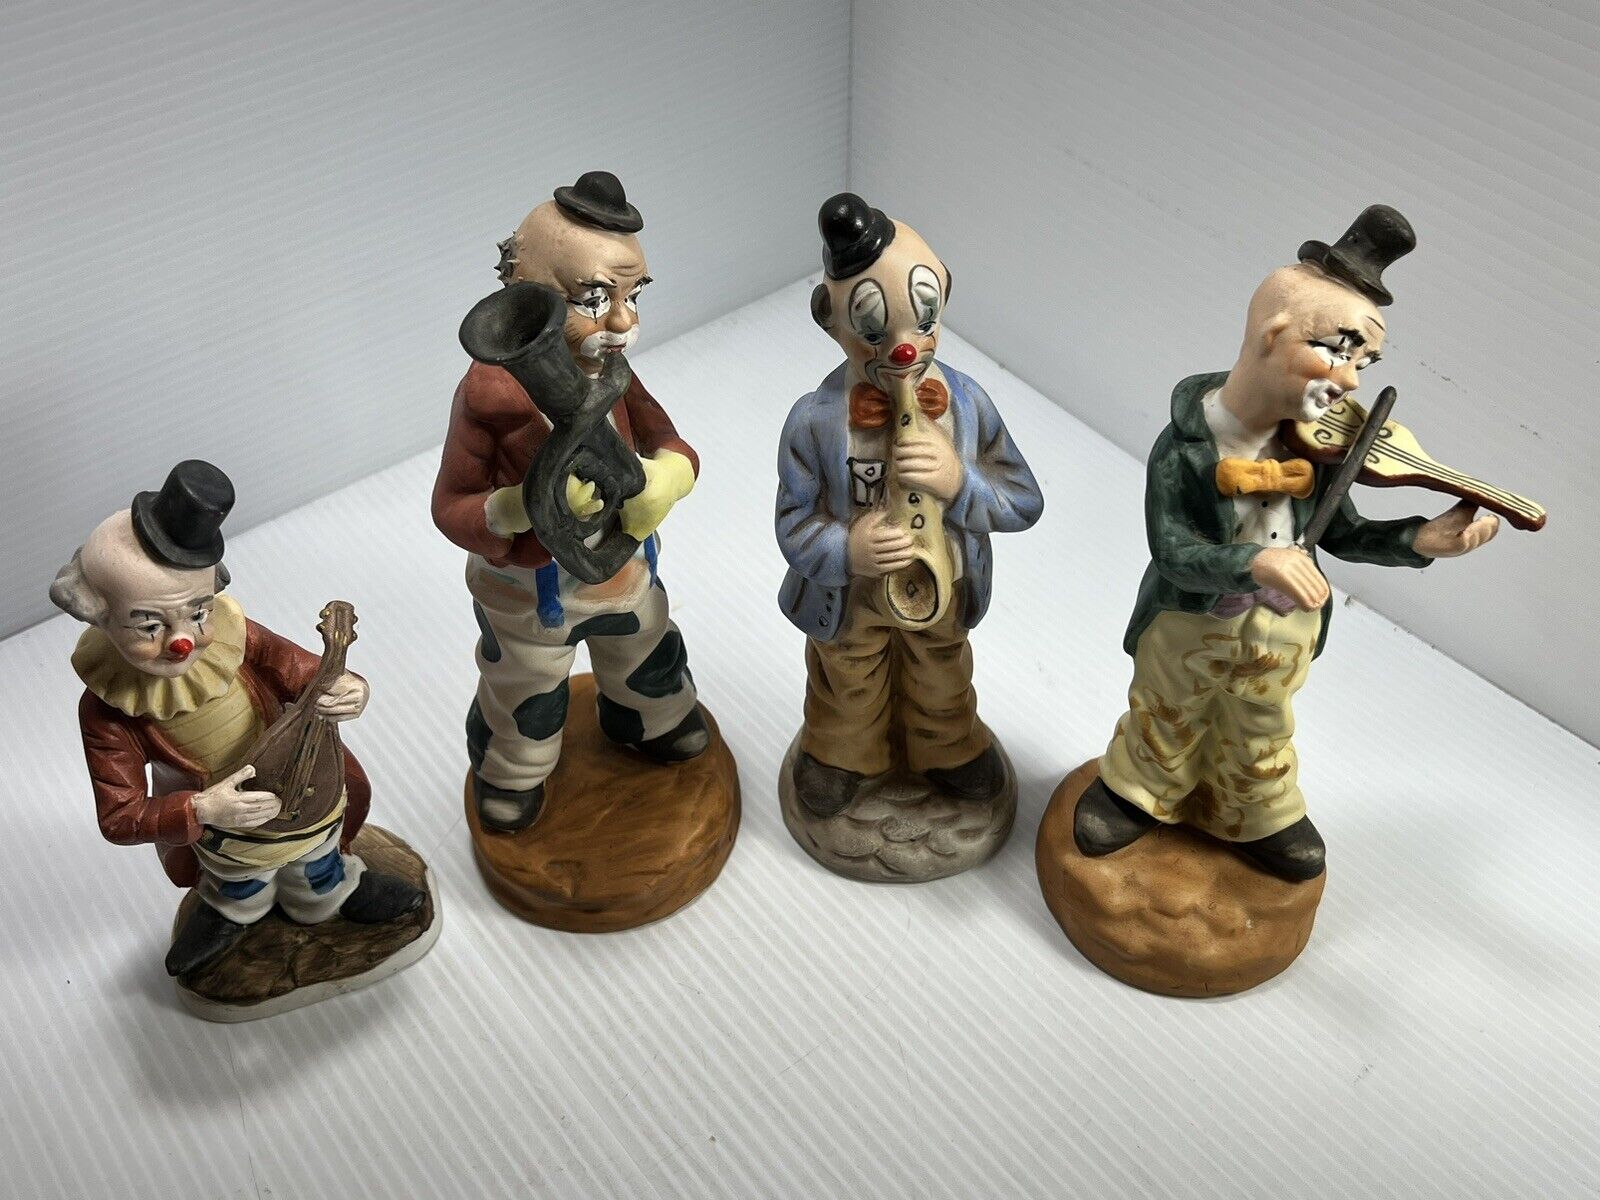 Ceramic Clowns Vintage Musical Band - Excellent New Condition - Beautiful Set